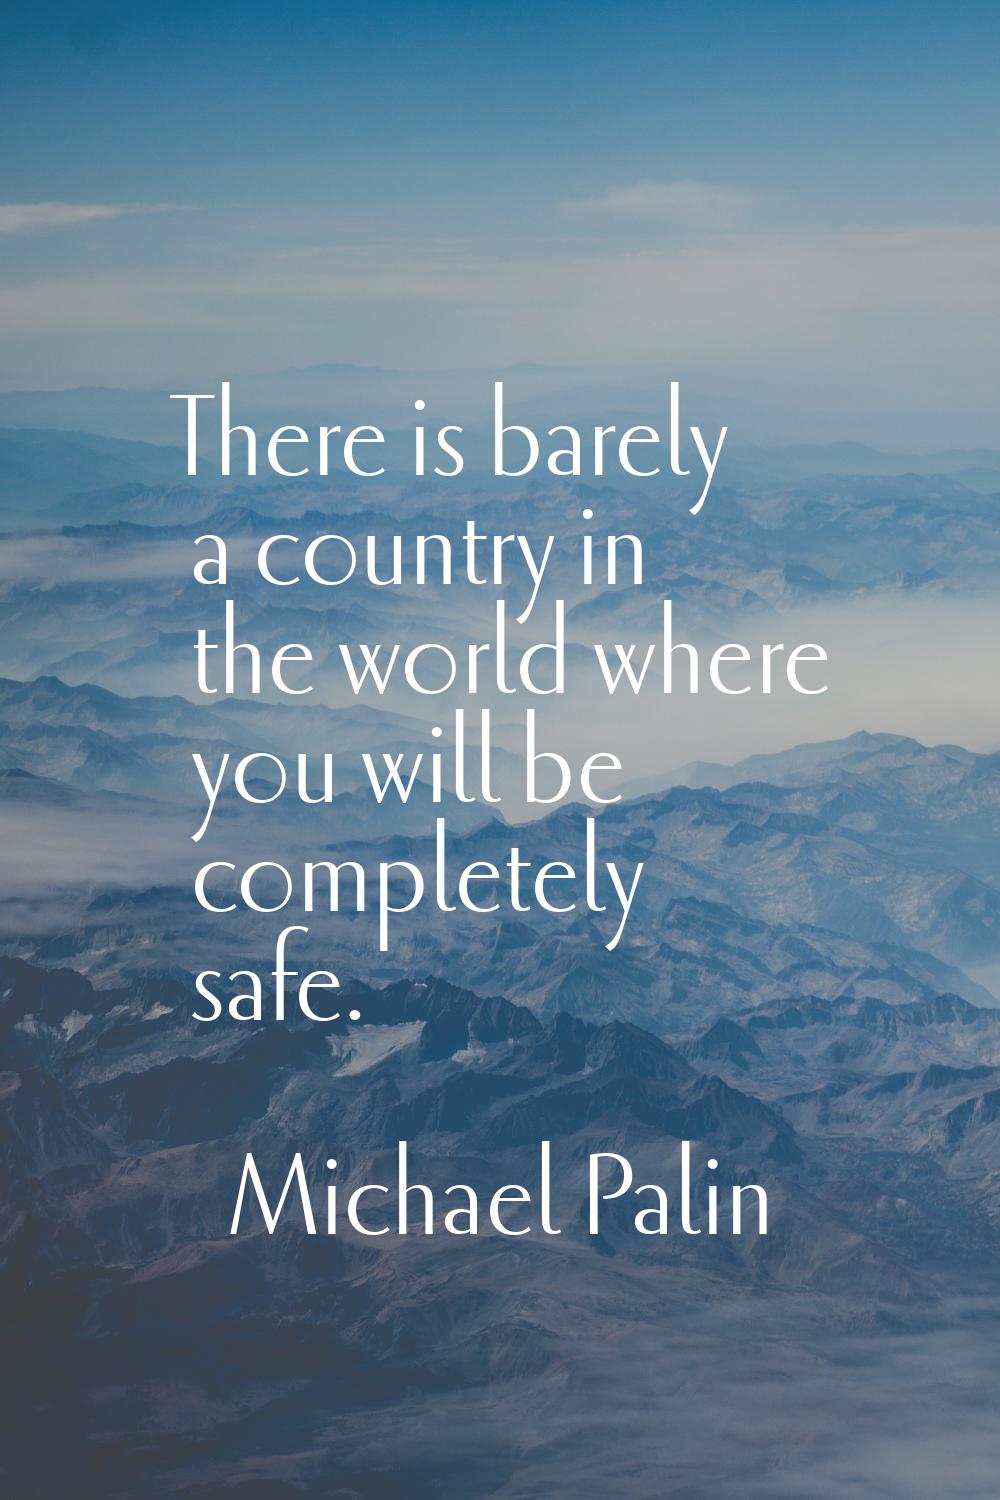 There is barely a country in the world where you will be completely safe.